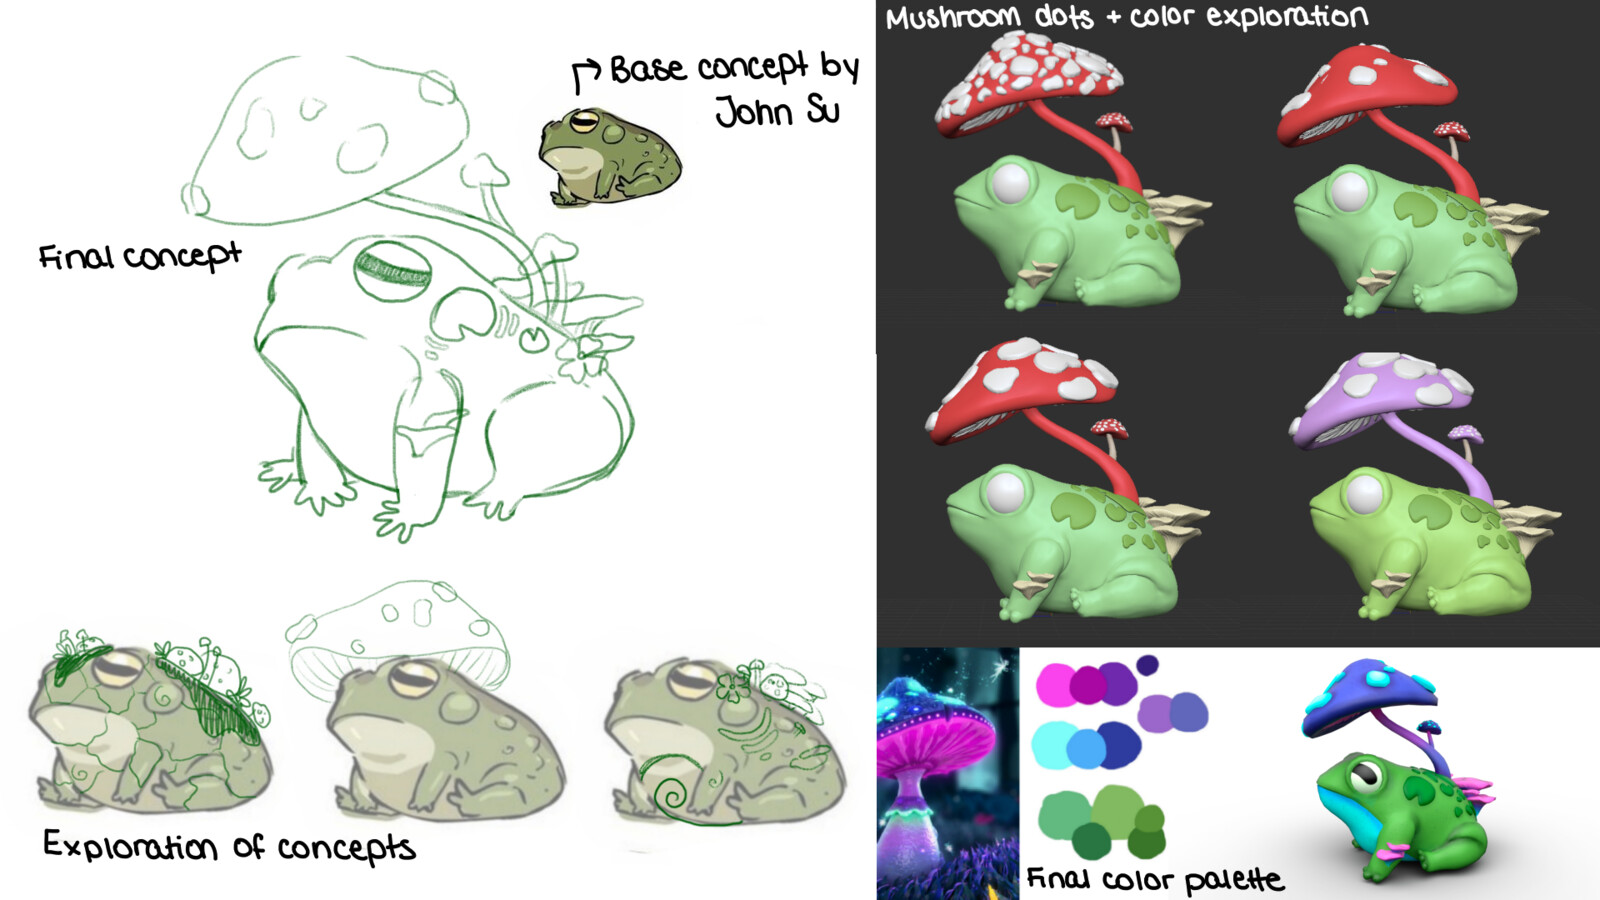 I based my concept off of John Su's frog drawing, but expended upon it to find a concept I wanted to sculpt. I also did a lot of exploration in terms of color palettes and sculpt details.